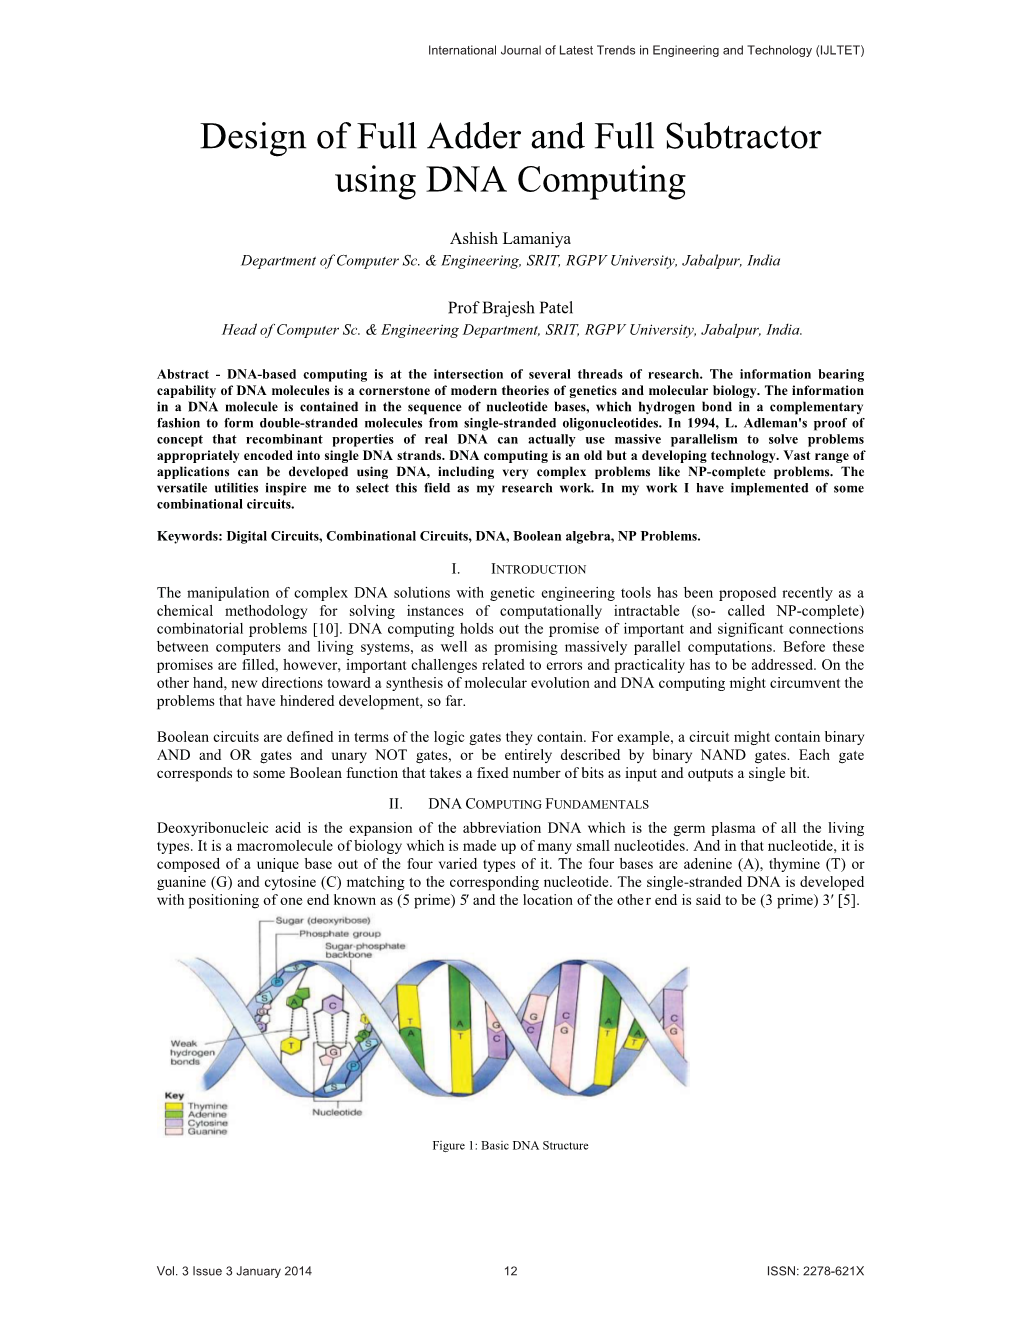 Design of Full Adder and Full Subtractor Using DNA Computing